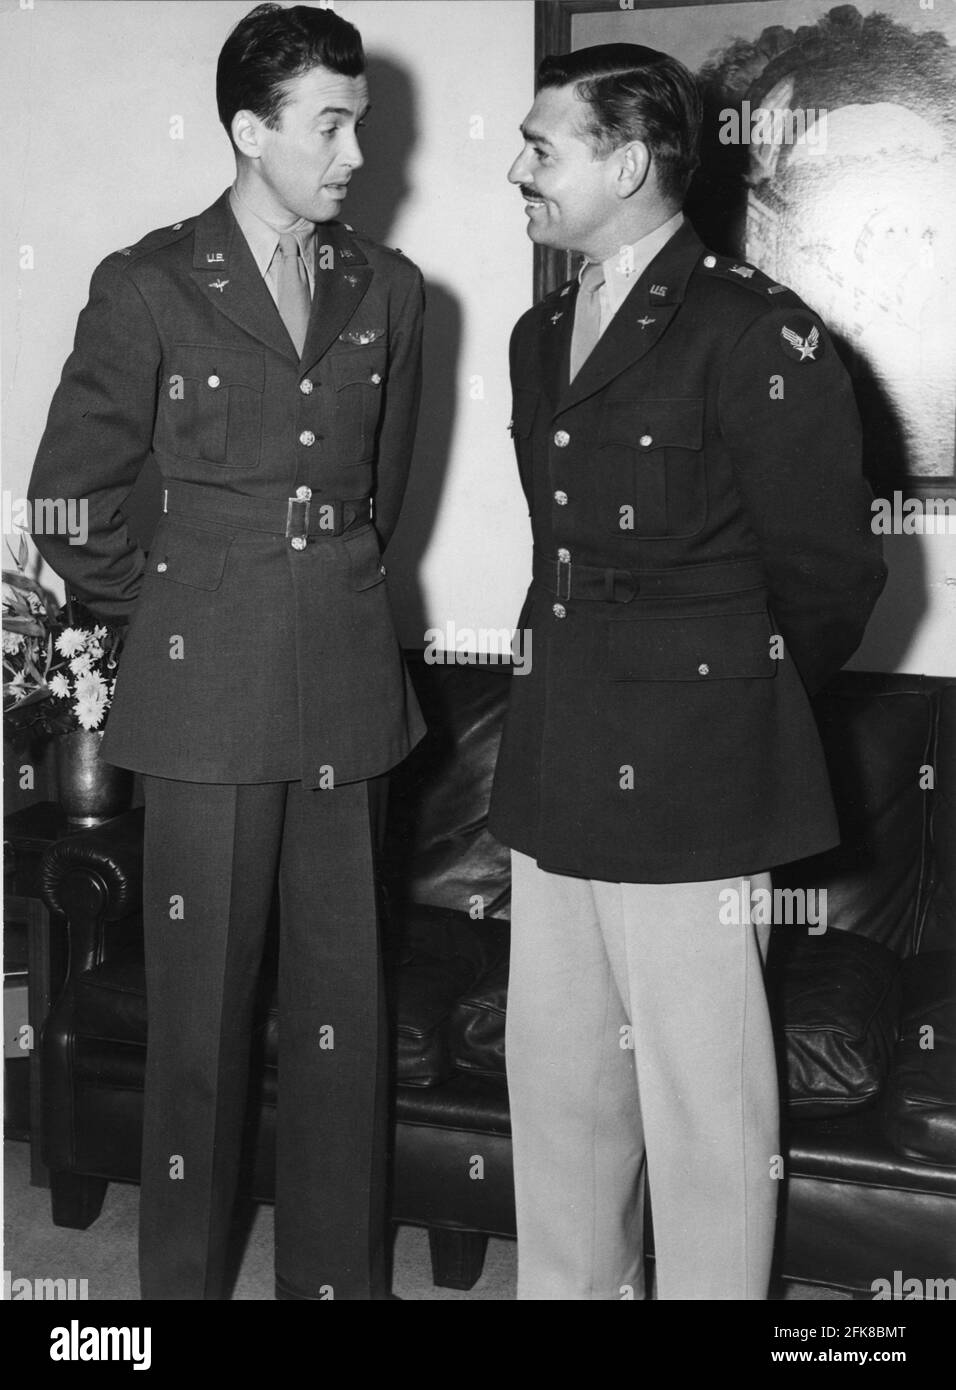 First Lieutenants JAMES STEWART and CLARK GABLE in Hollywood in early 1943 on official business meet for the first time since they both joined the U.S. Army Air Forces publicity for Metro Goldwyn Mayer Stock Photo